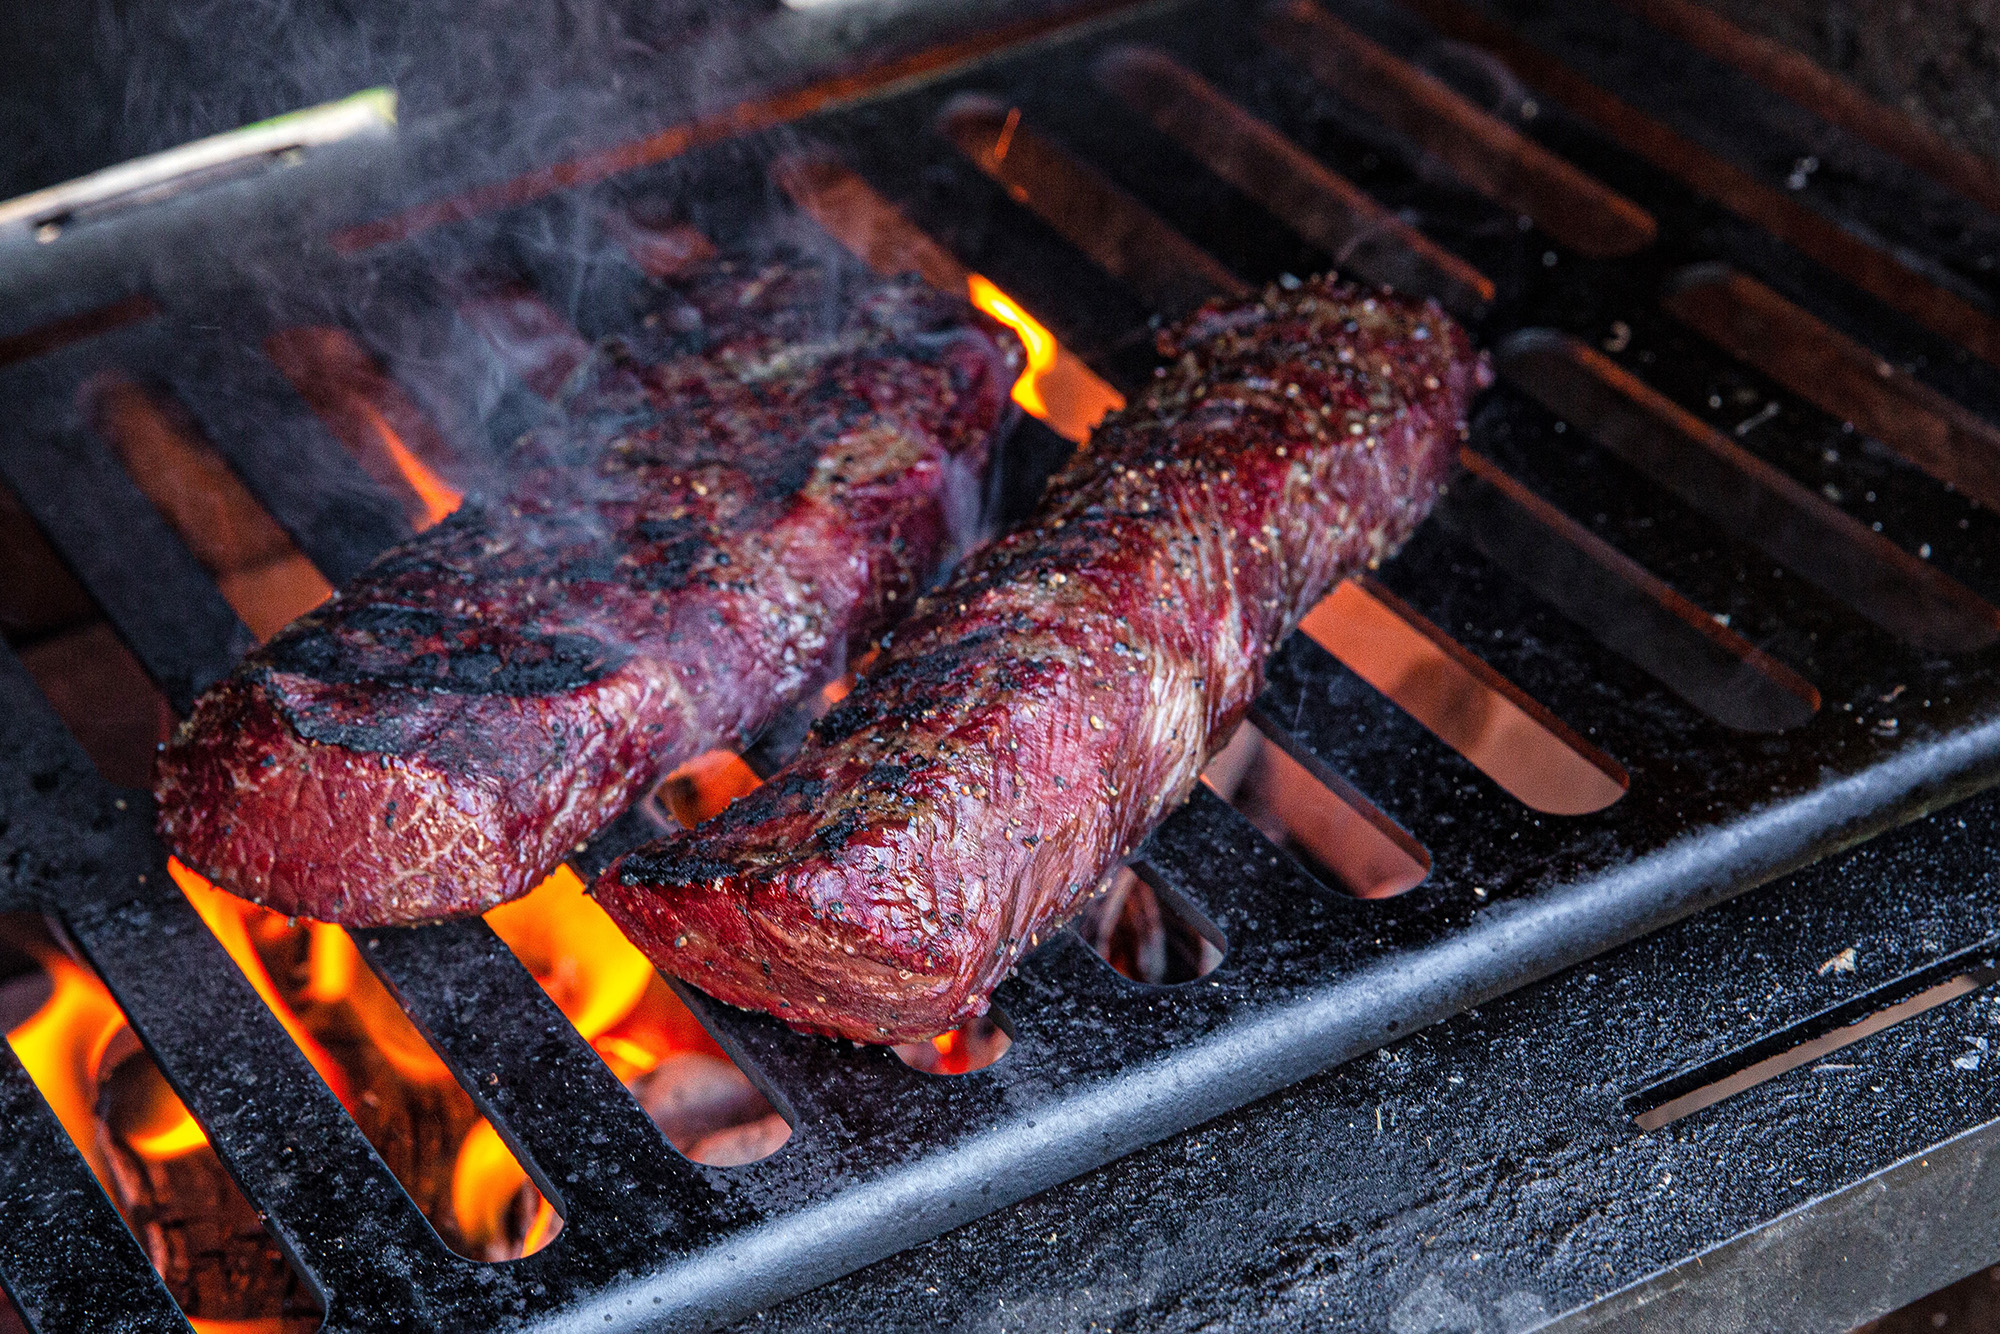 Wild game backstraps seared on a grill.